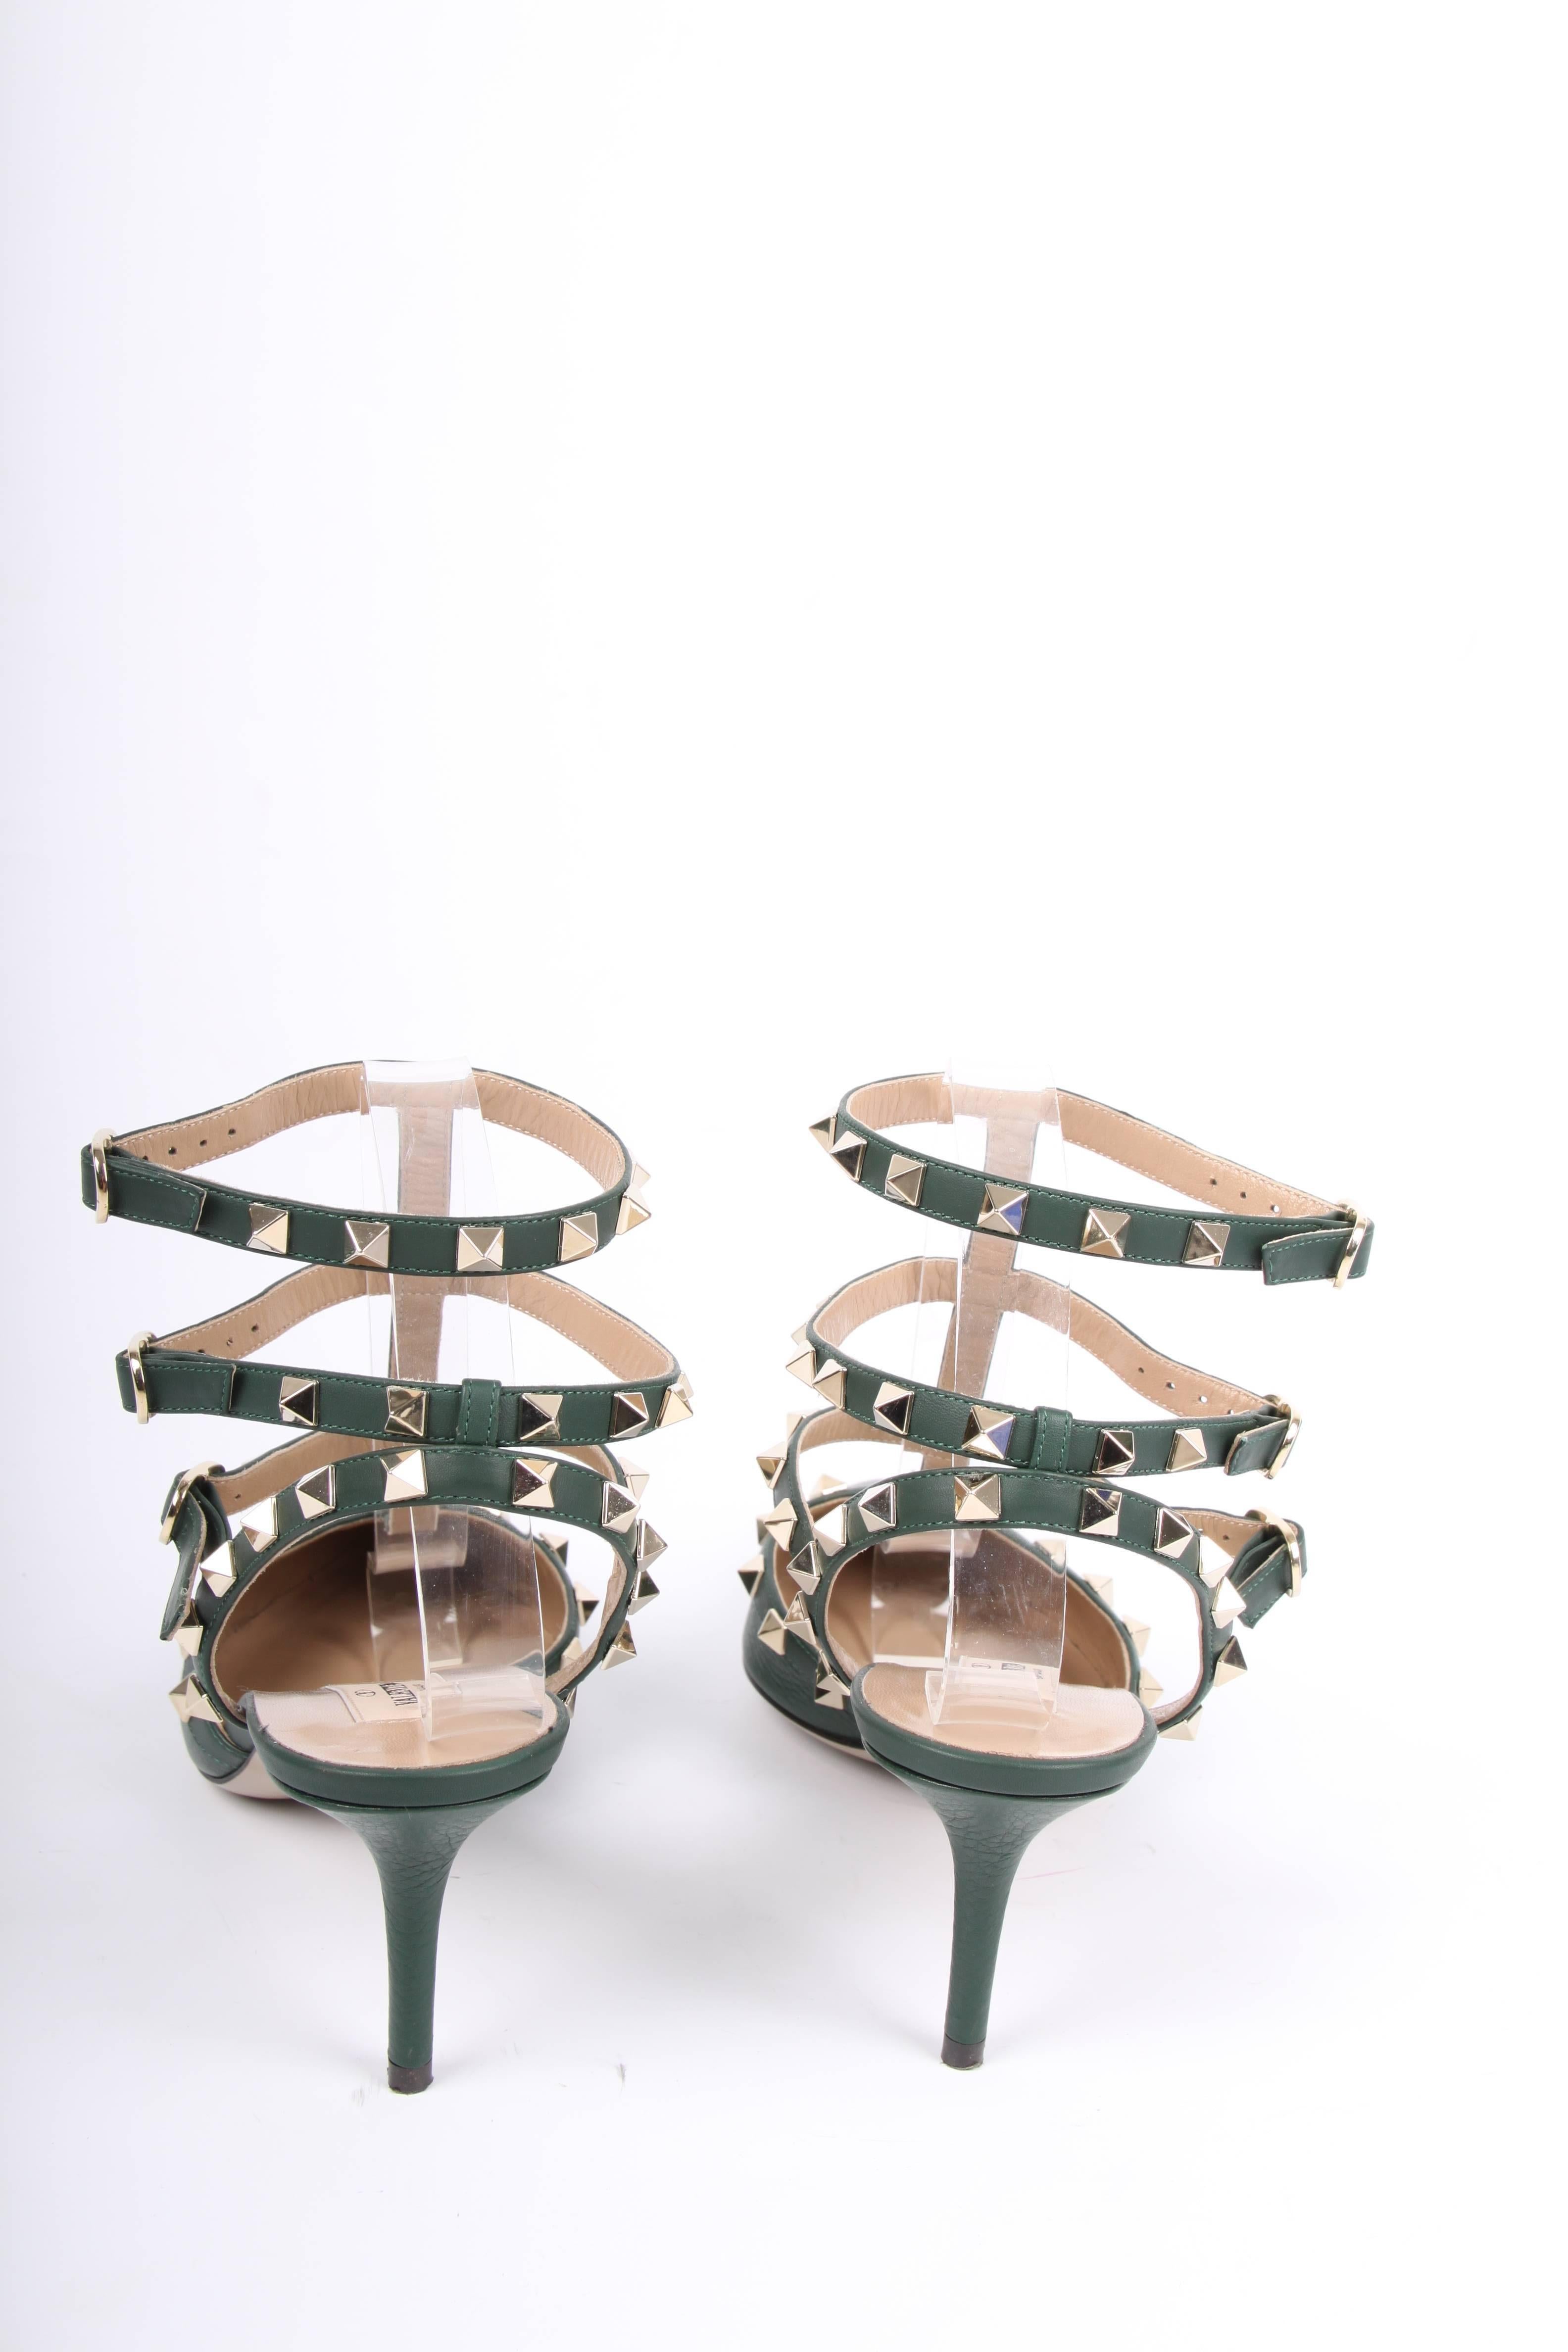 Valentino's rockstuds are famous! This time applied on wonderful green leather pumps.

A pointy toe and a small heel that measures about 8 centimeters, no platform. As much as three straps with a buckle around the ankle, all embellished with the